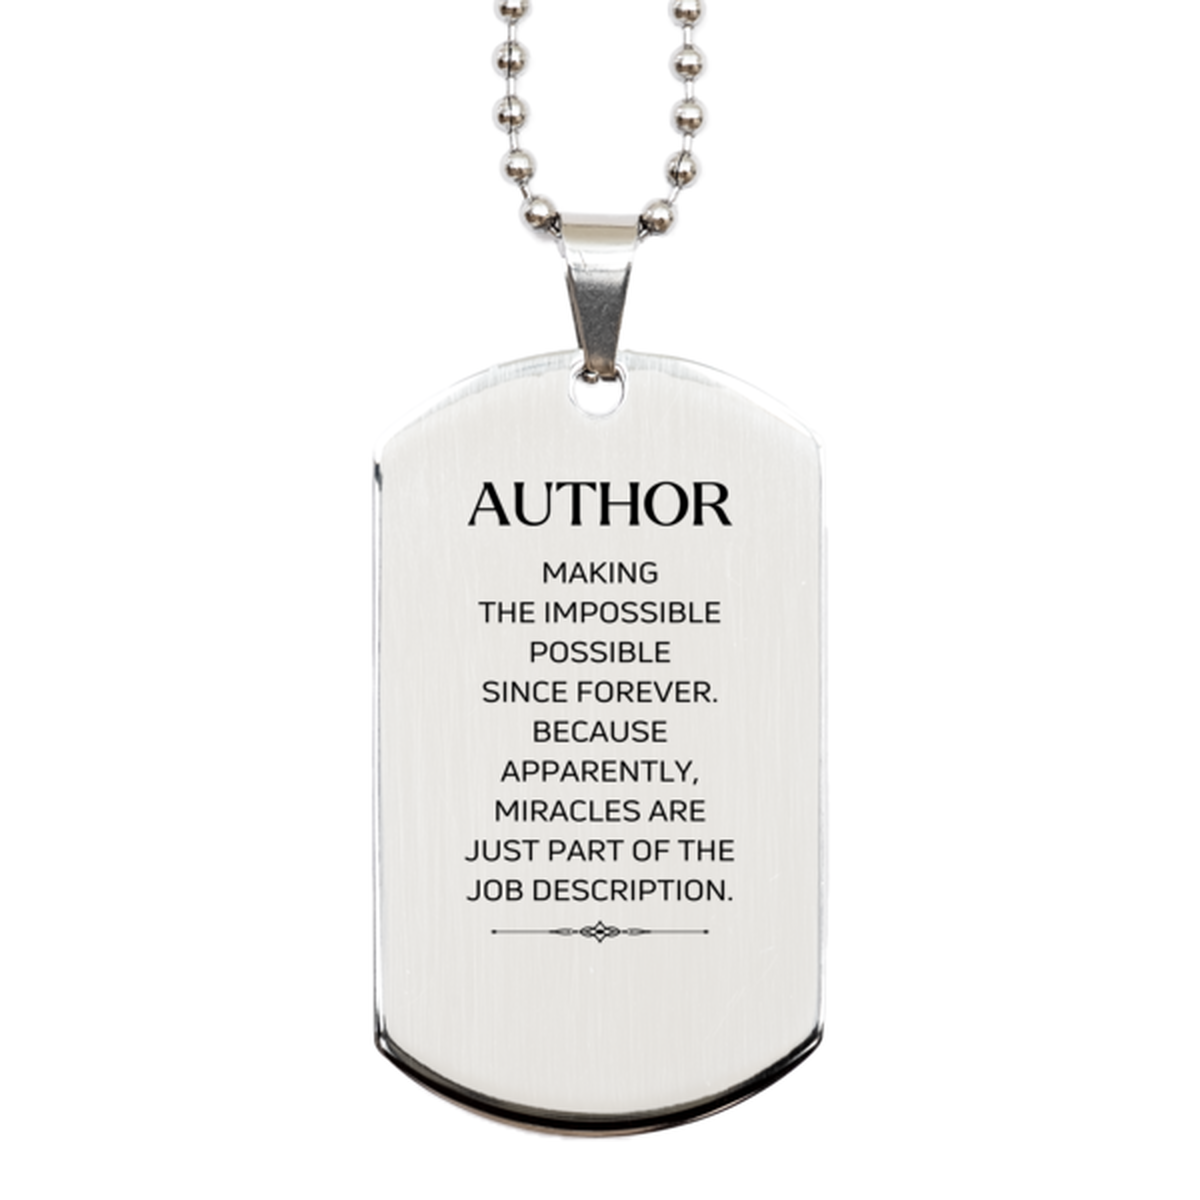 Funny Author Gifts, Miracles are just part of the job description, Inspirational Birthday Silver Dog Tag For Author, Men, Women, Coworkers, Friends, Boss